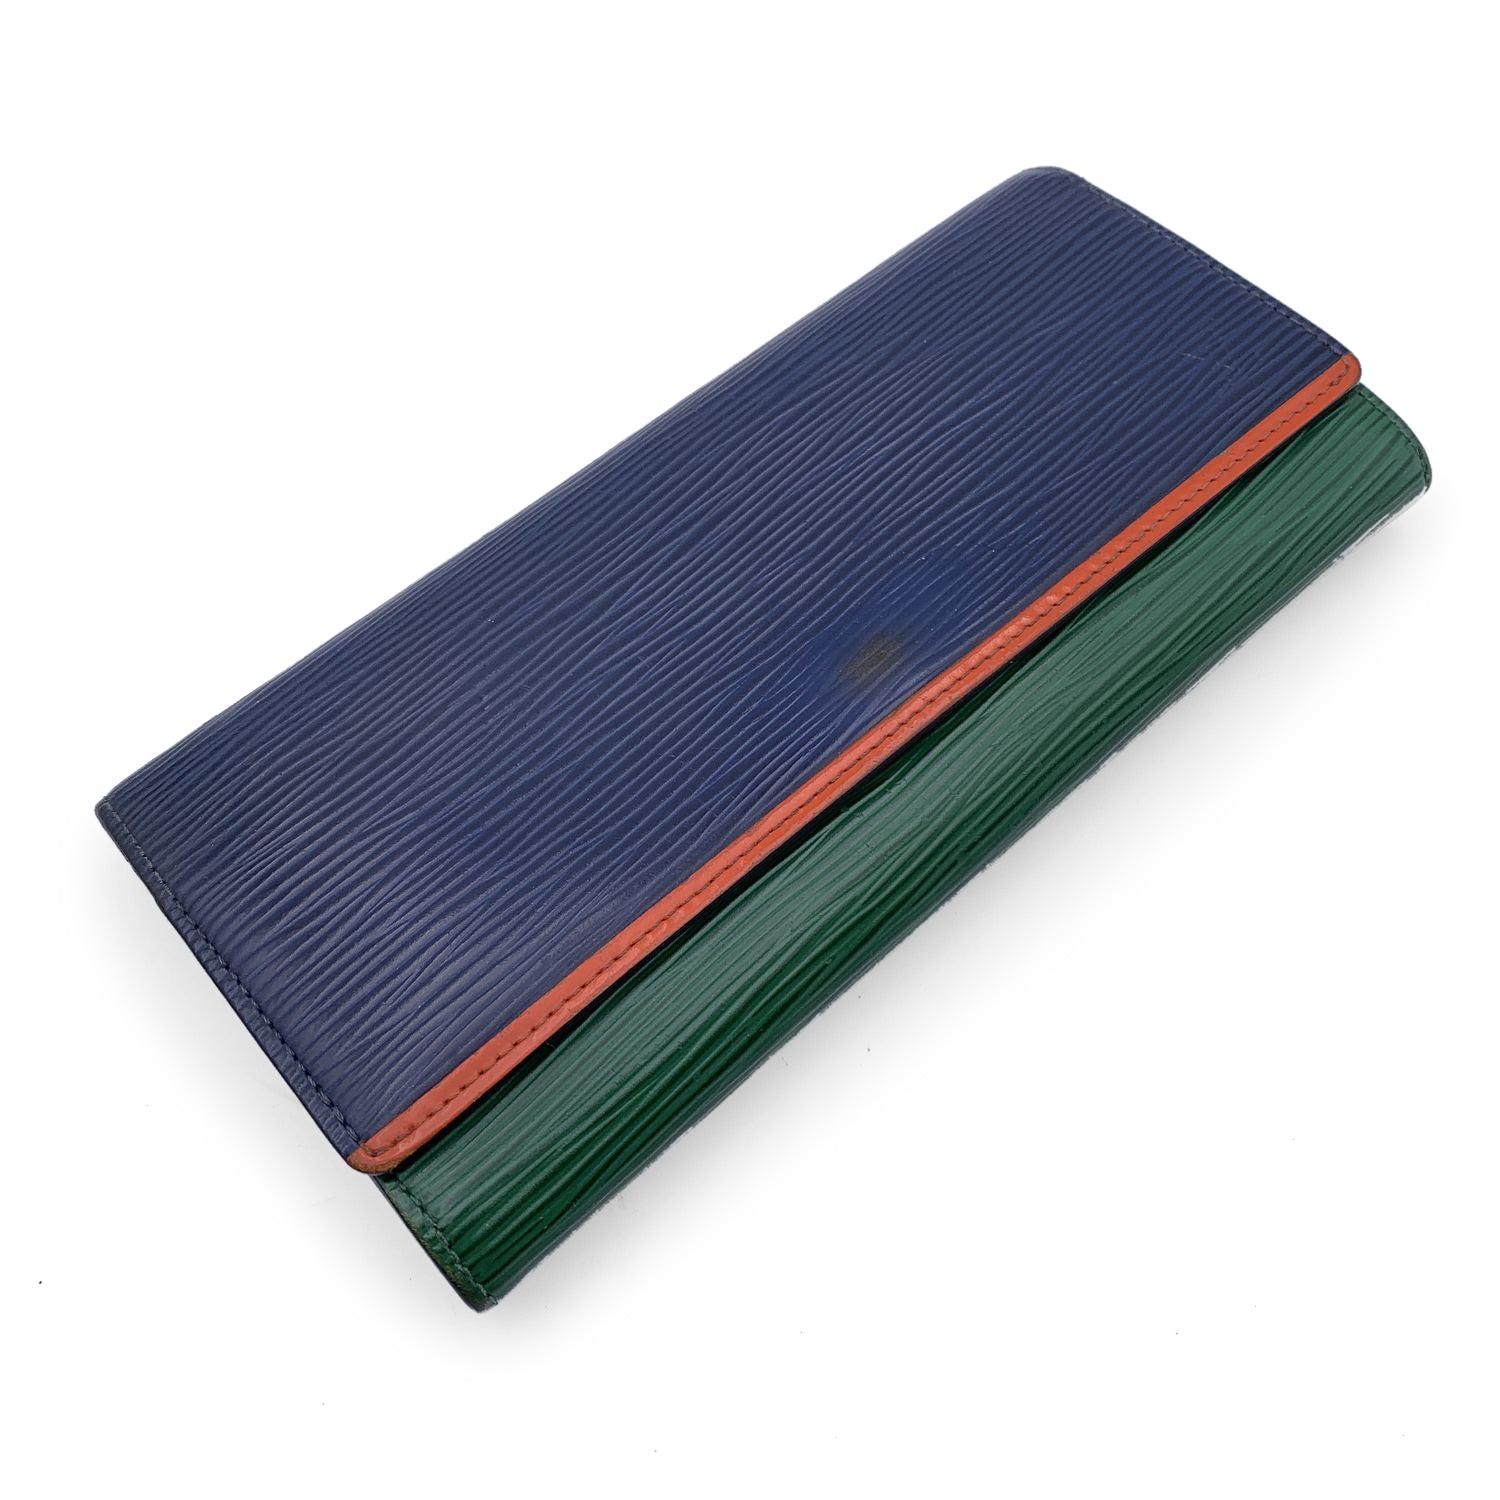 Louis Vuitton 'Flore' wallet, in blue, green and orange color. Epi leather. Interior fully lined in leather. Flap with snap closure. 1 flat open pocket on the back. 1 coin compartment with zip closure. 1 bill compartment. 10 credit card slots and 1